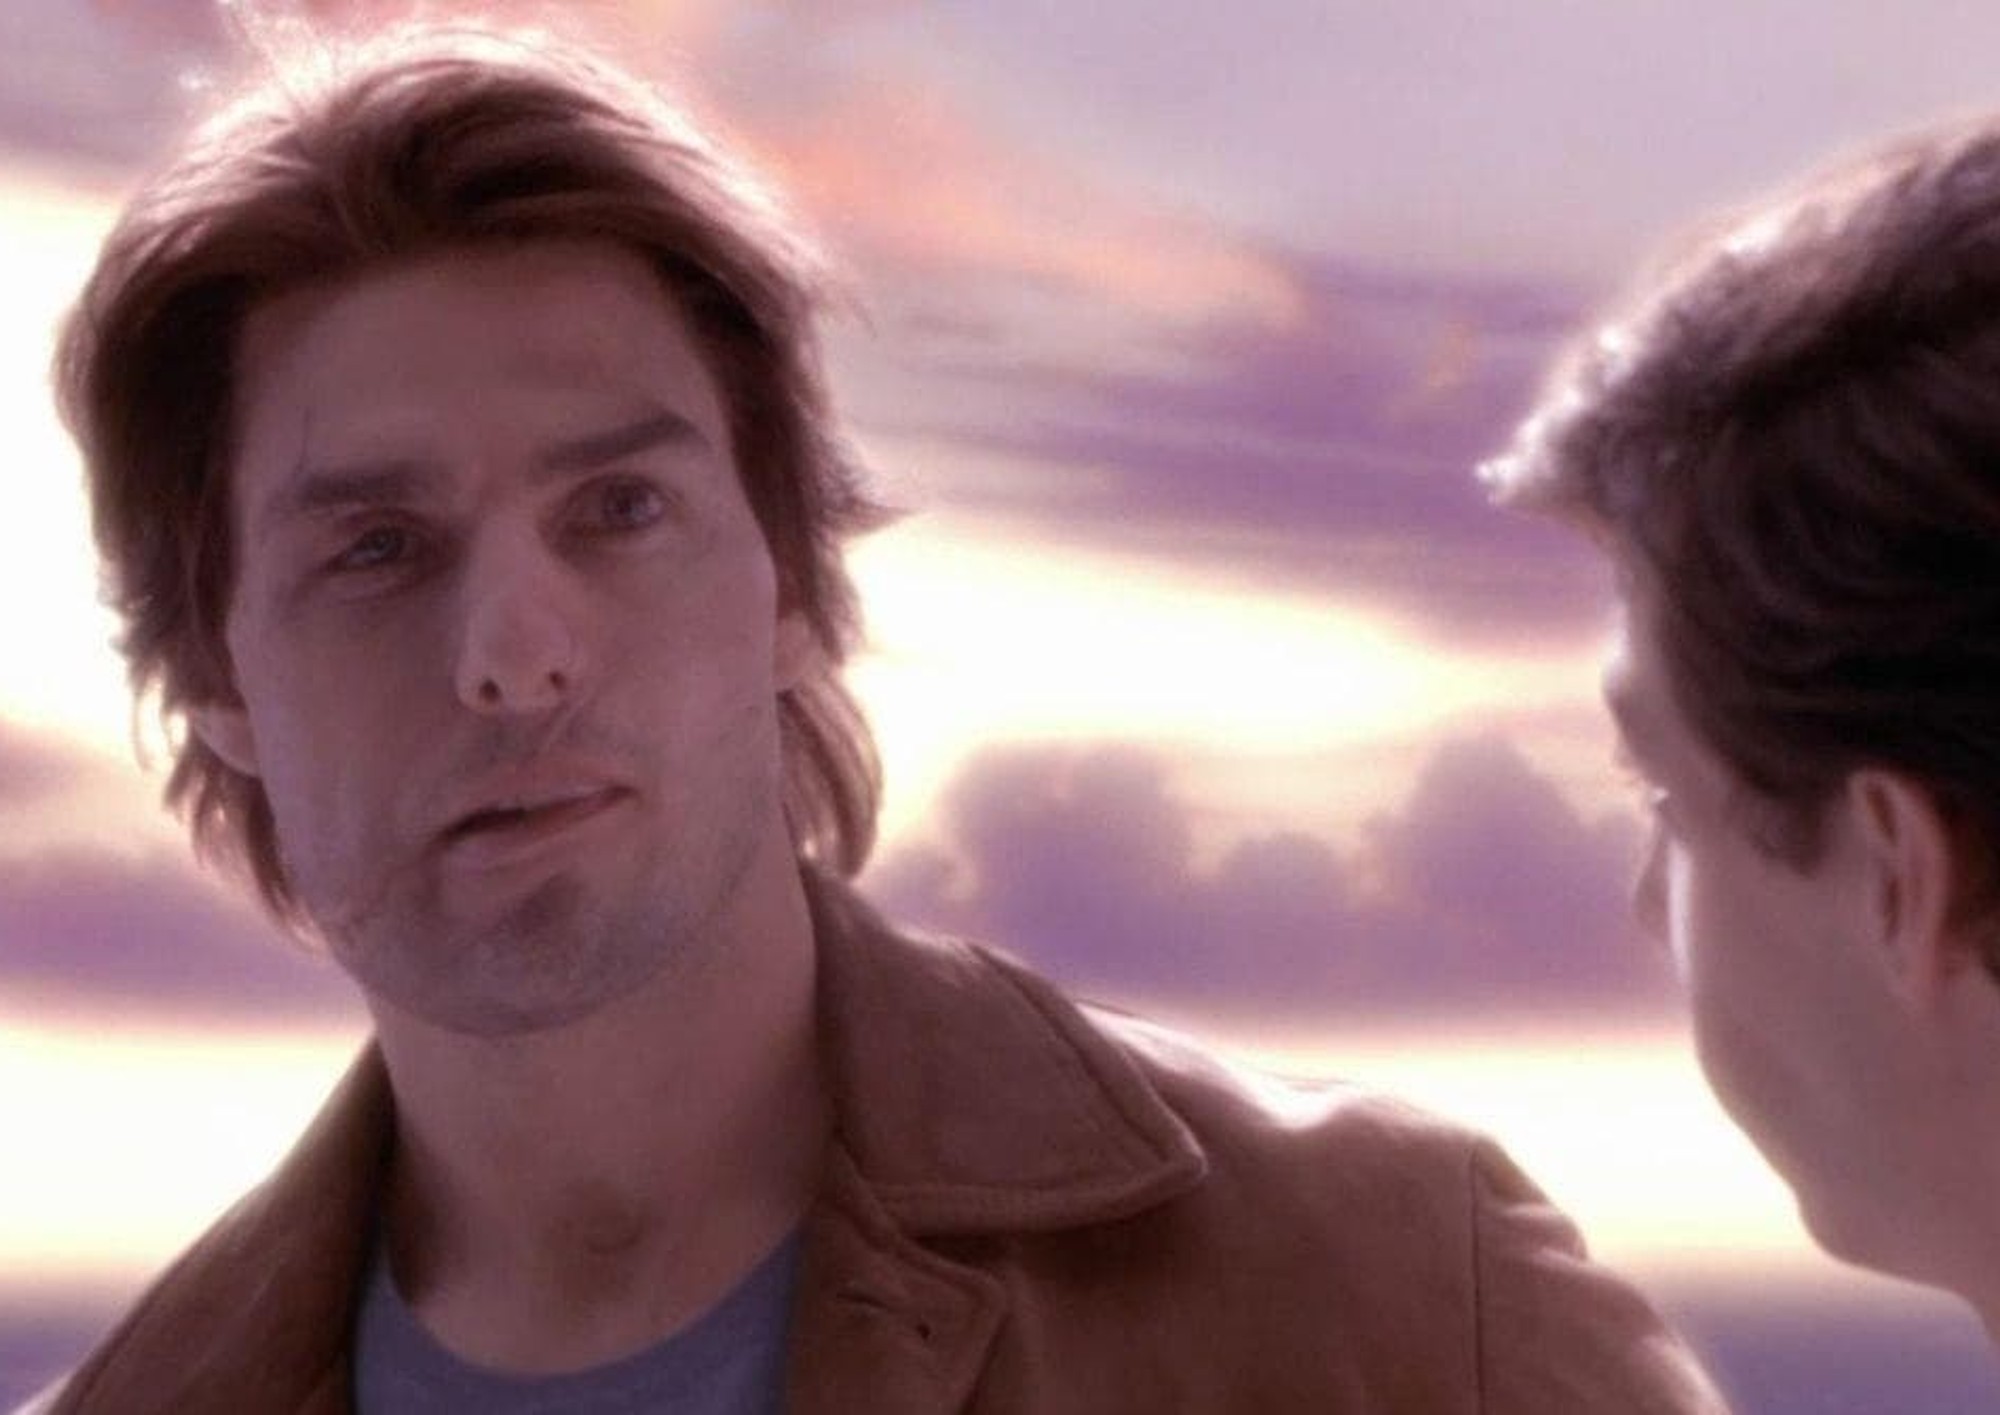 Image from the motion picture Vanilla Sky